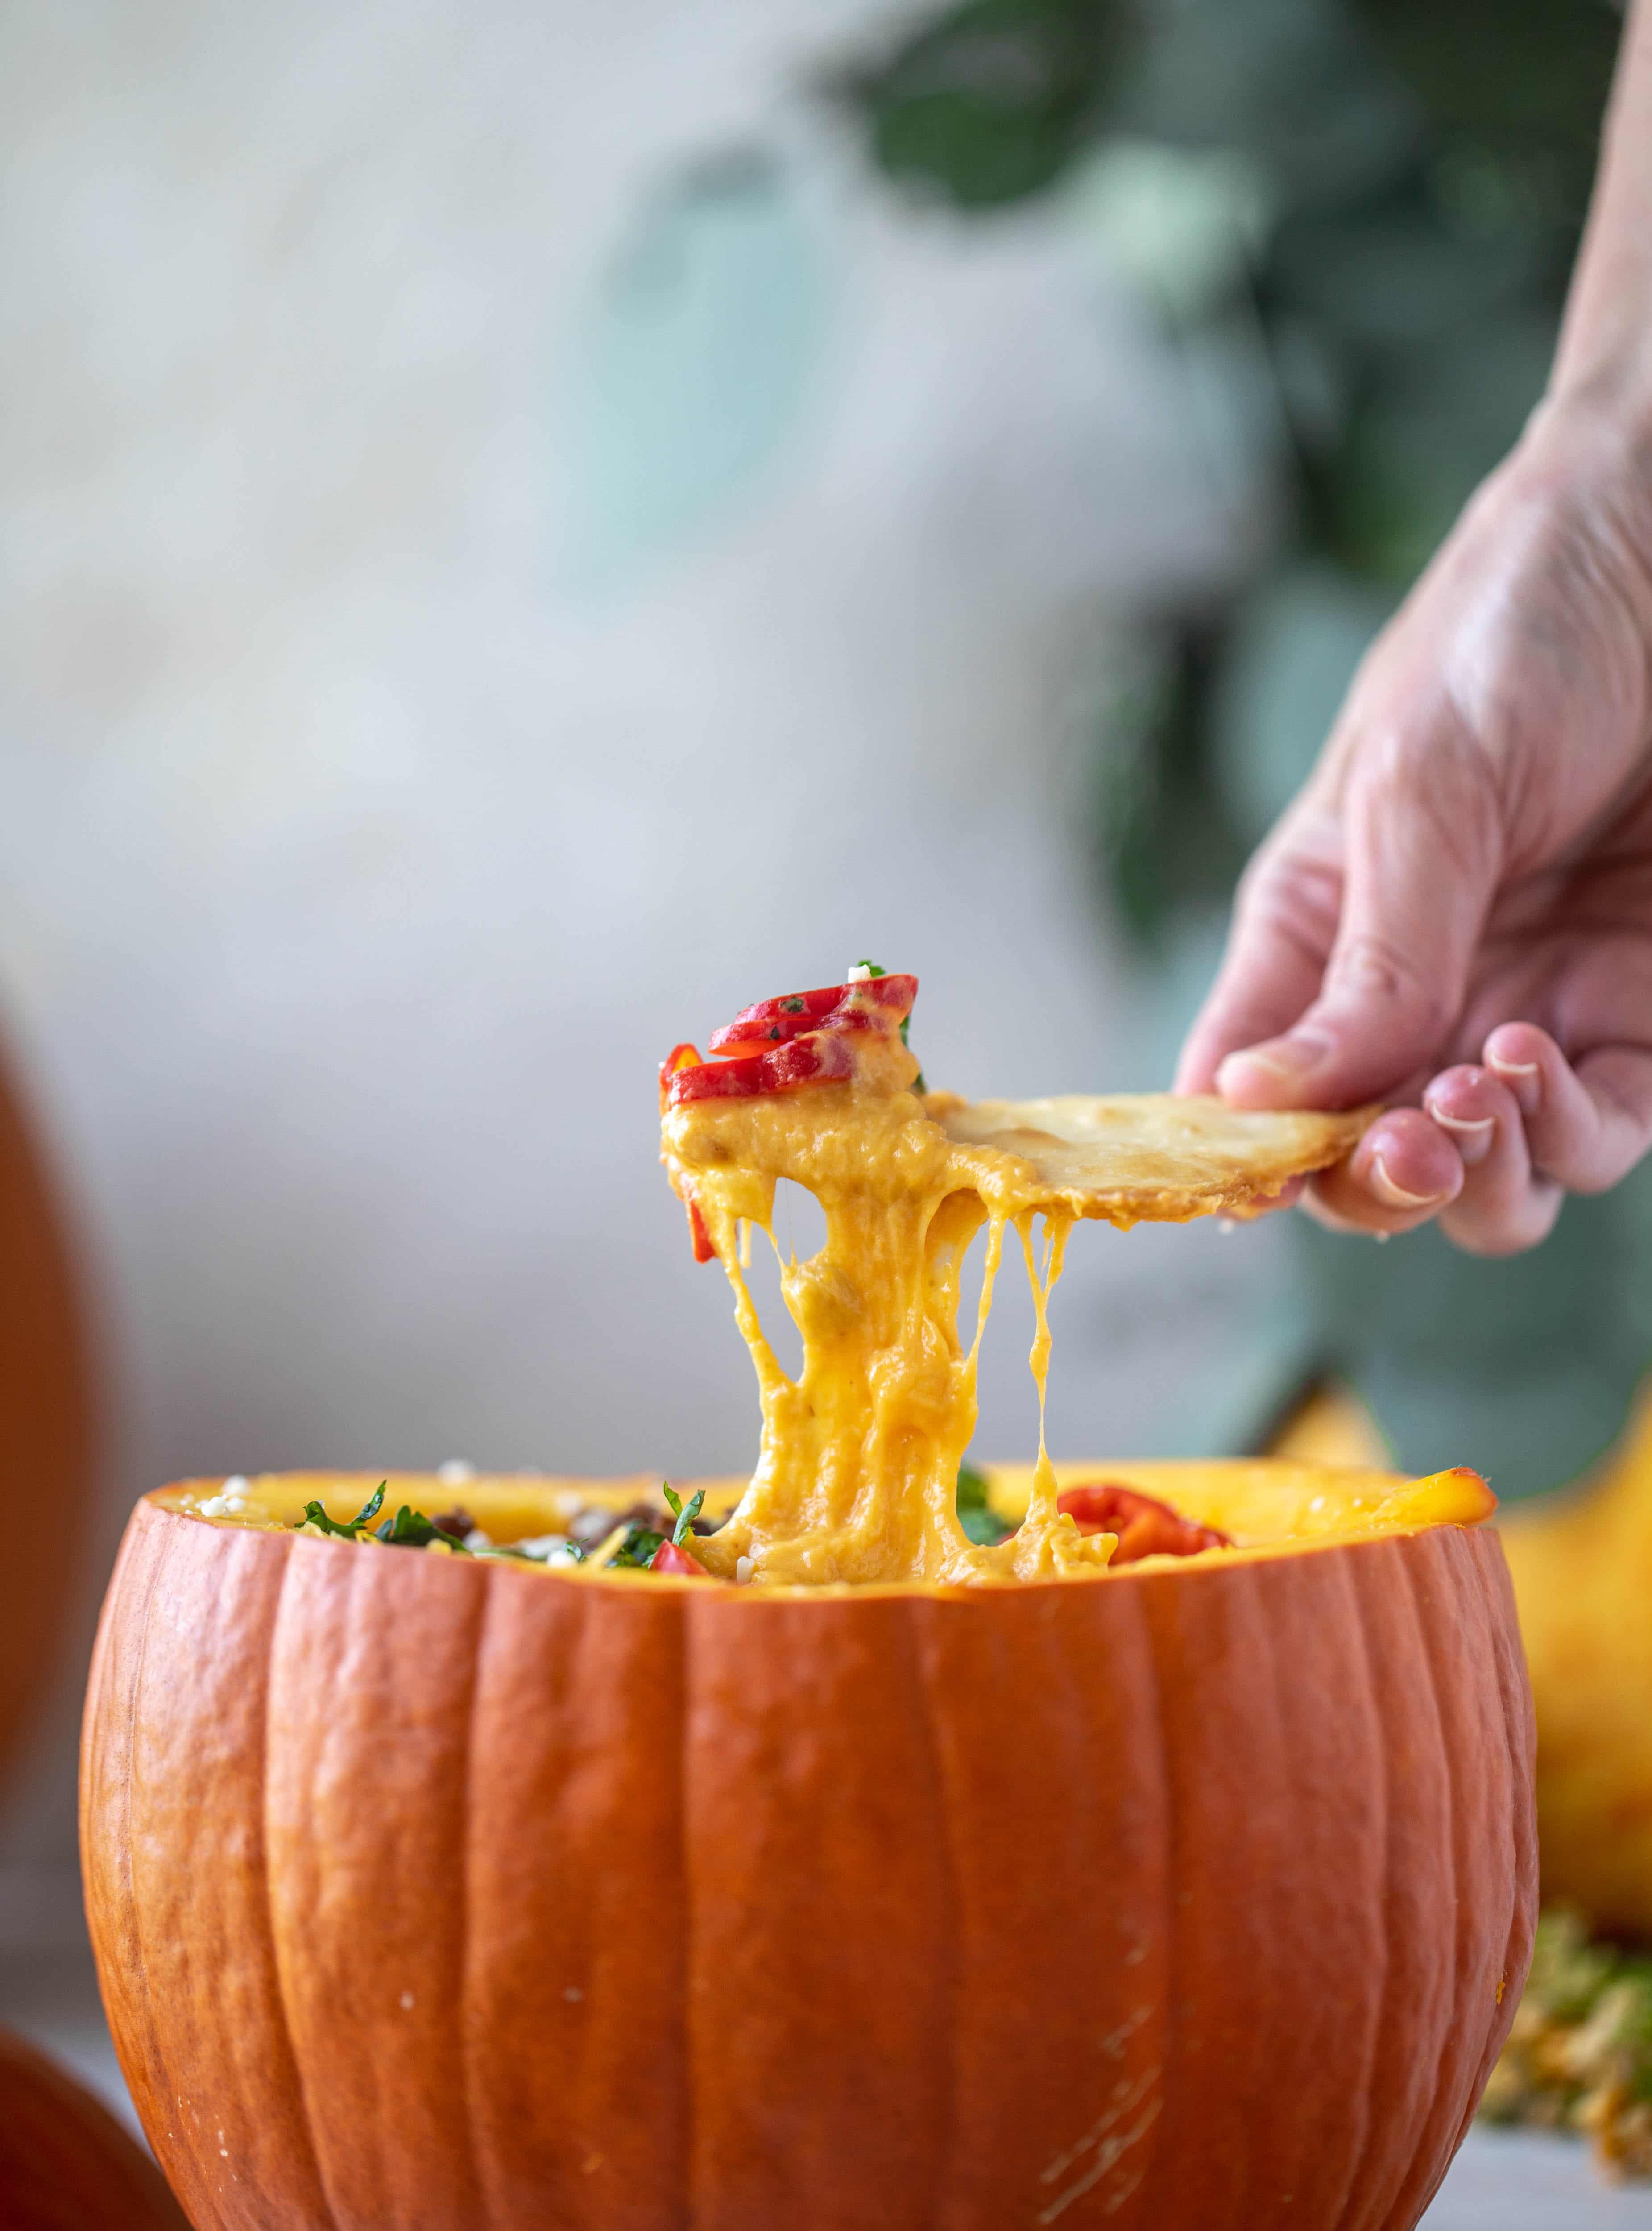 This pumpkin queso fundido is the perfect indulgence for fall. Warm pumpkin queso topped with chroizo, pepitas and jalapeños. It's delish! 